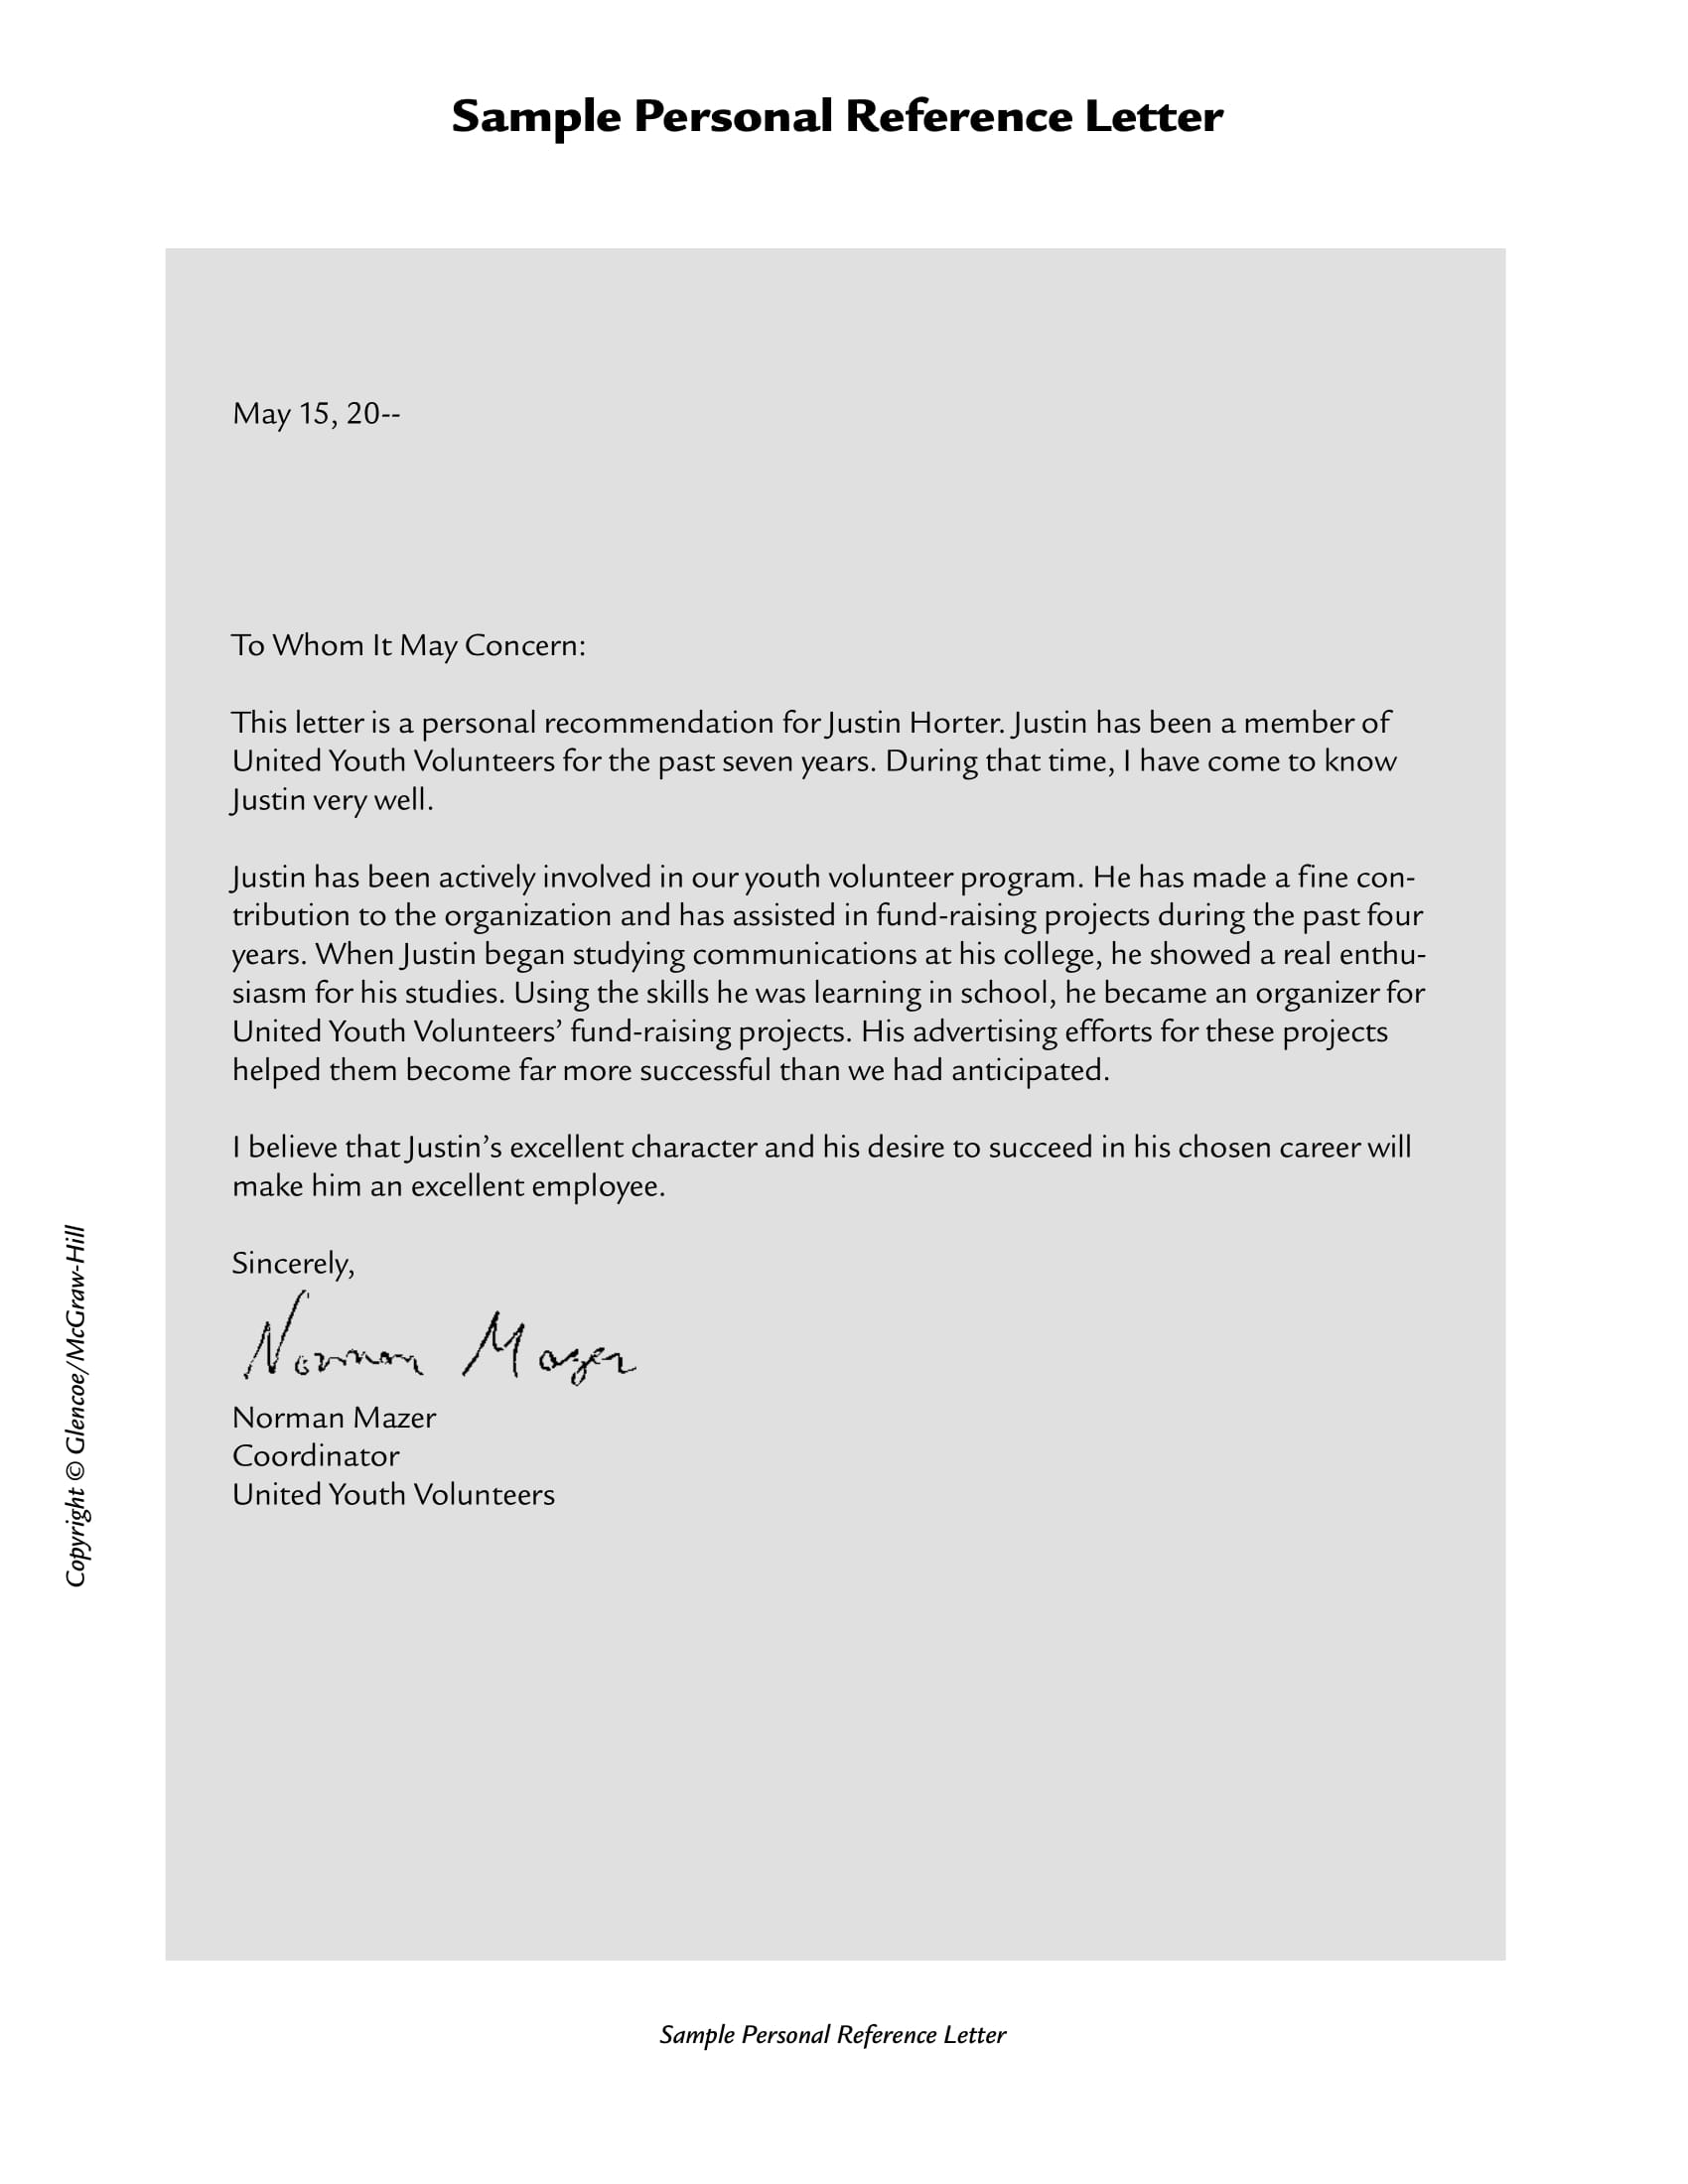 sample personal recommendation letter example